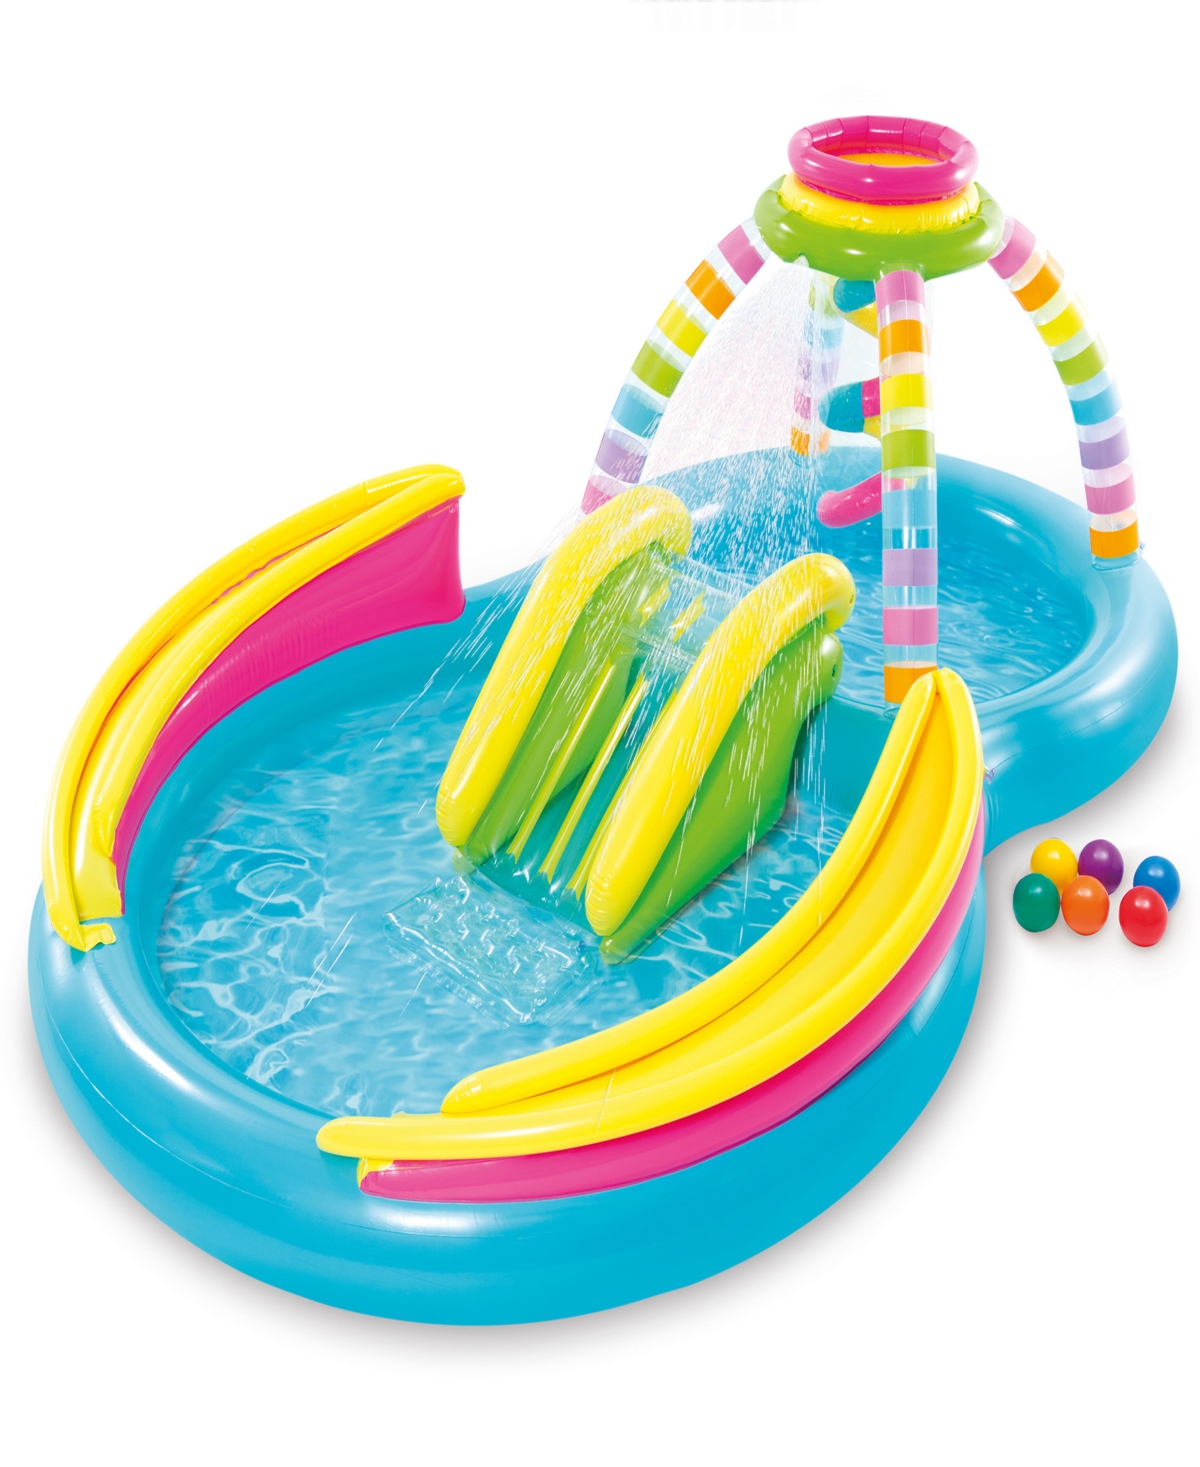 Intex Babies' Rainbow Funnel Inflatable Play Center In Multi